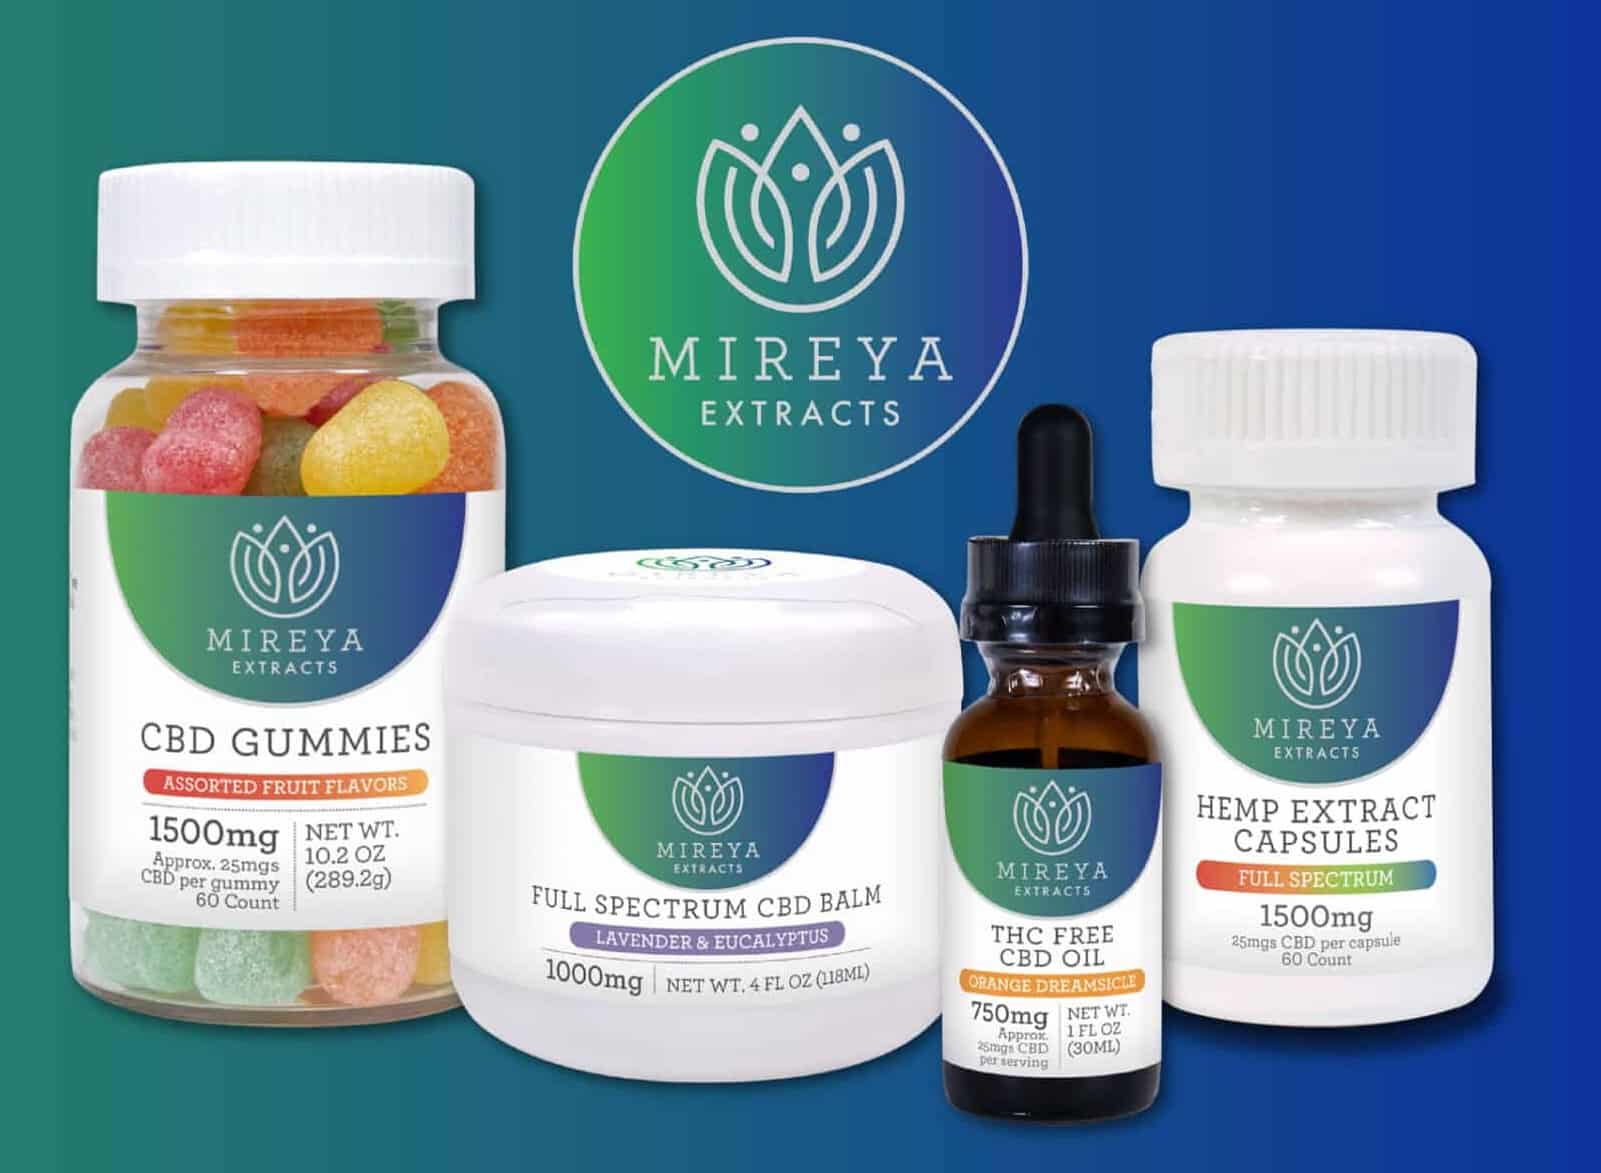 Discover Mireya Extracts